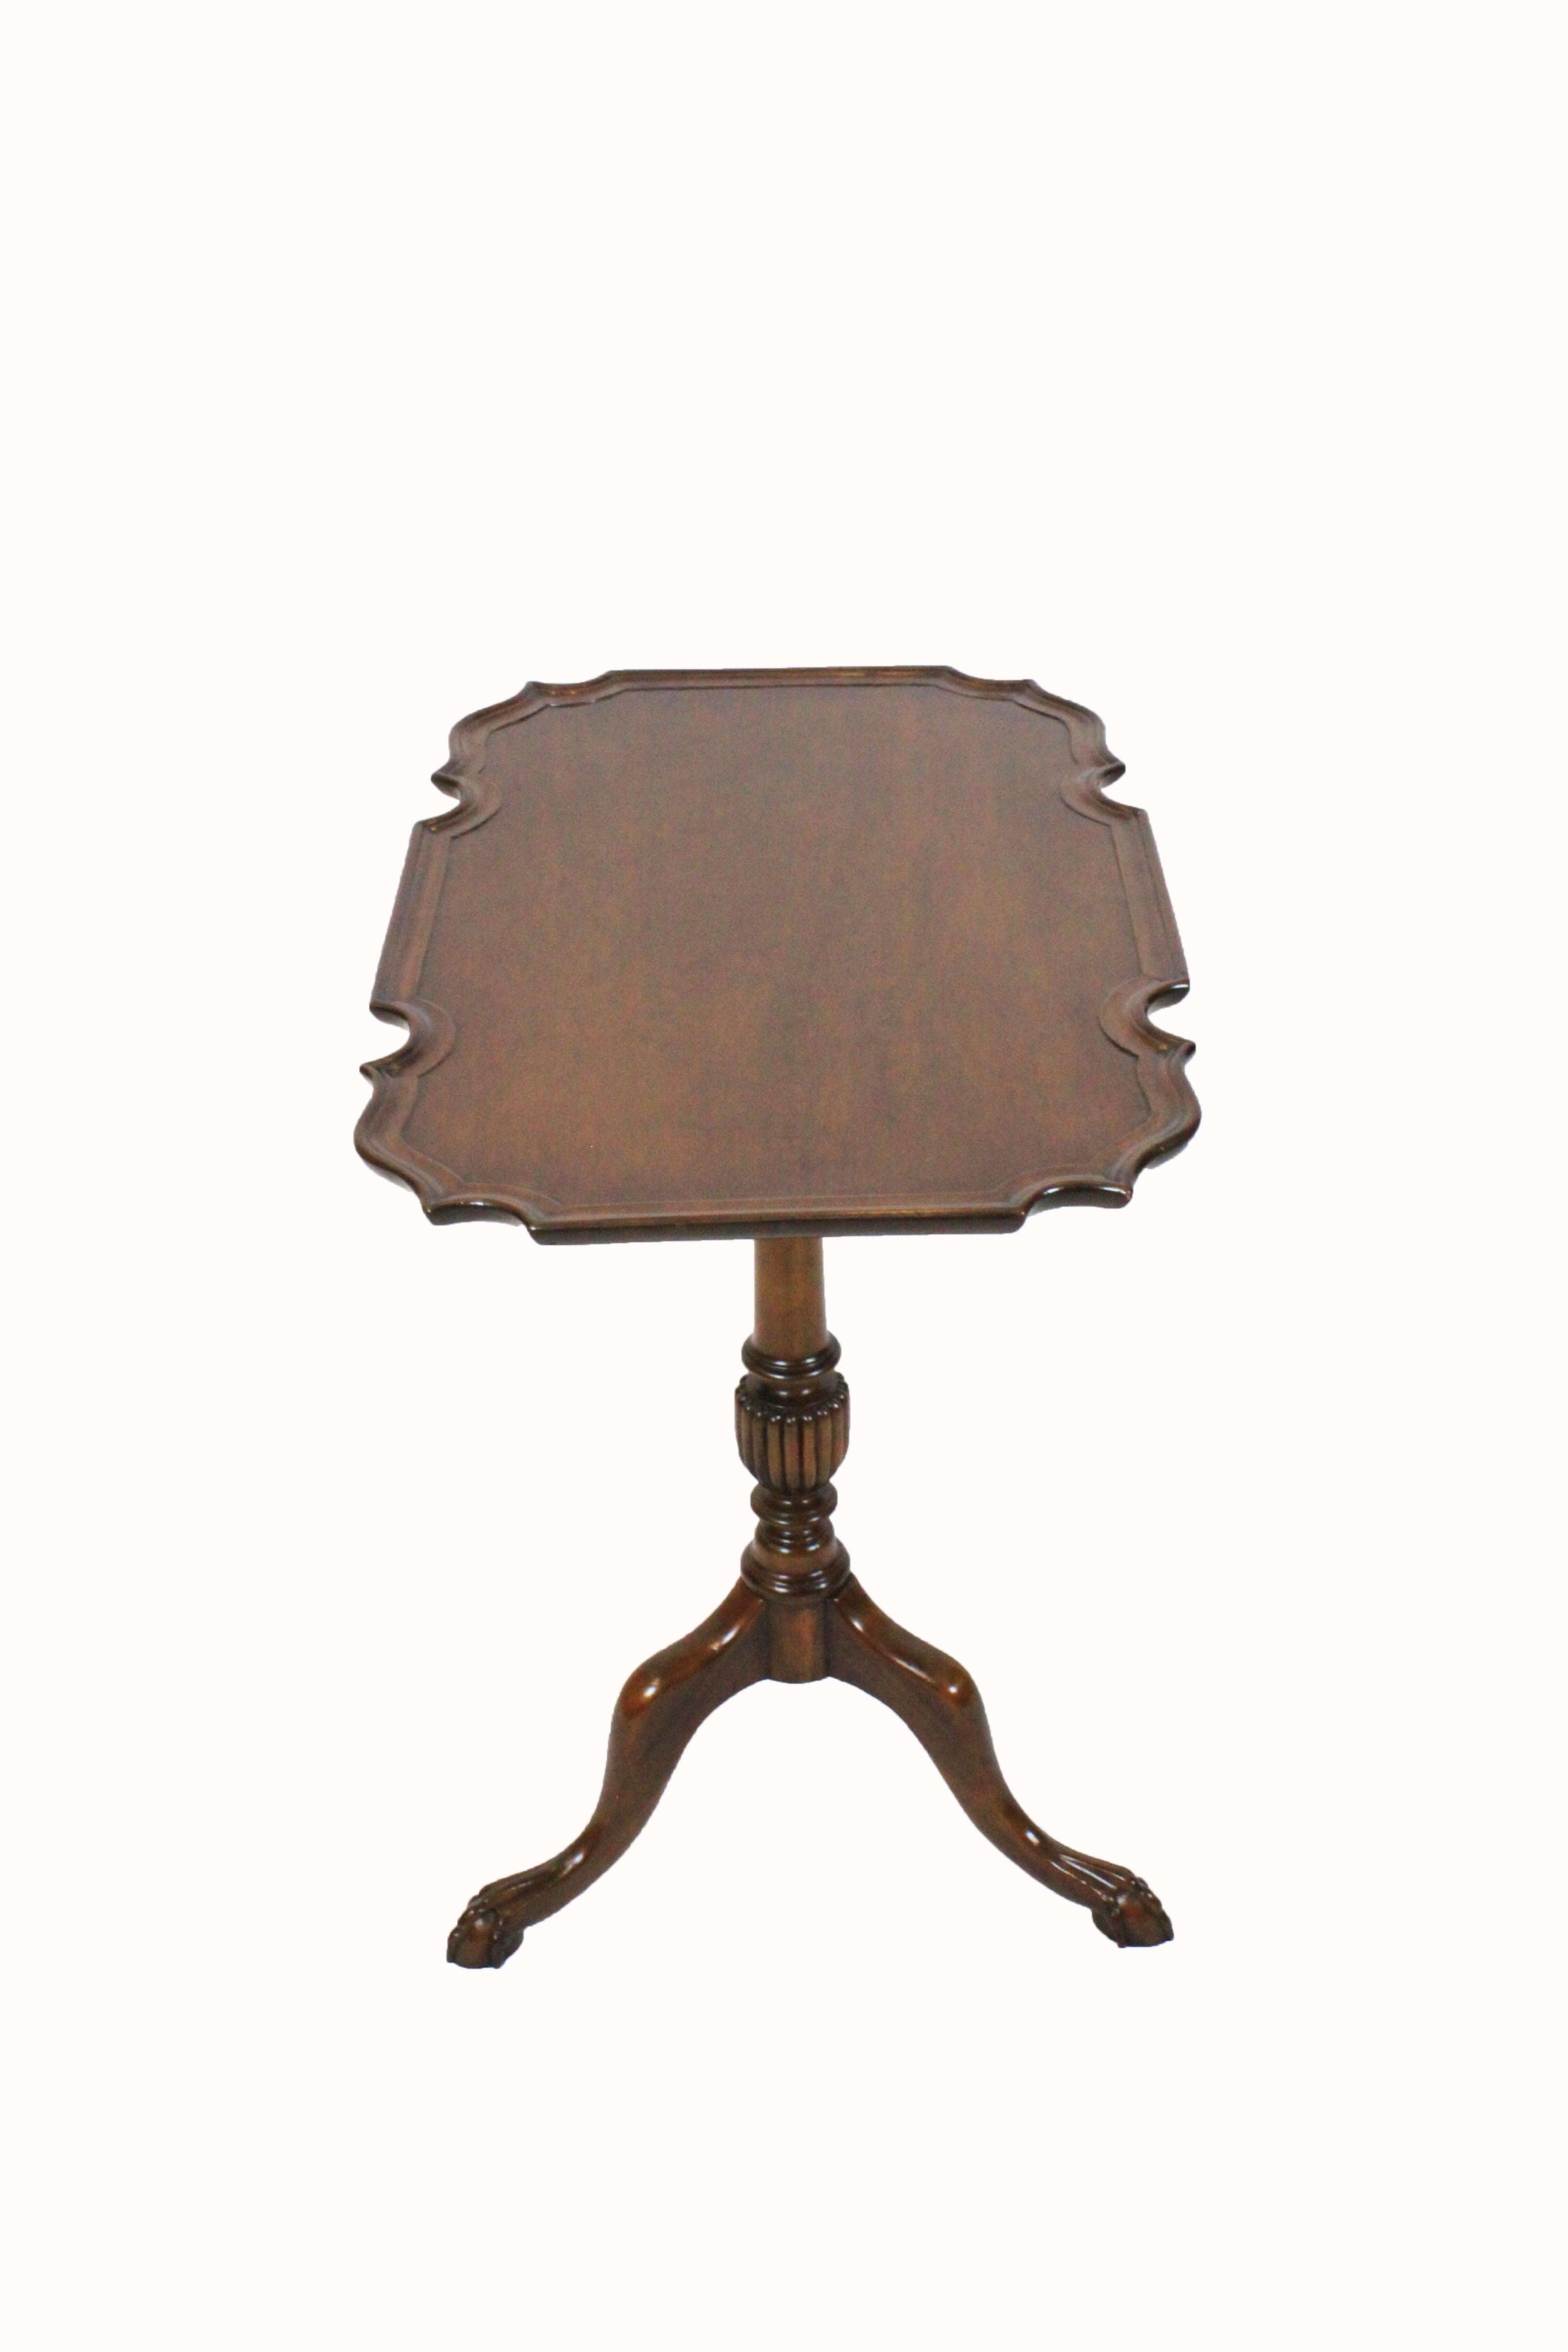 Contemporary Chippendale Style Tilt-top Table with Pie Crust Top